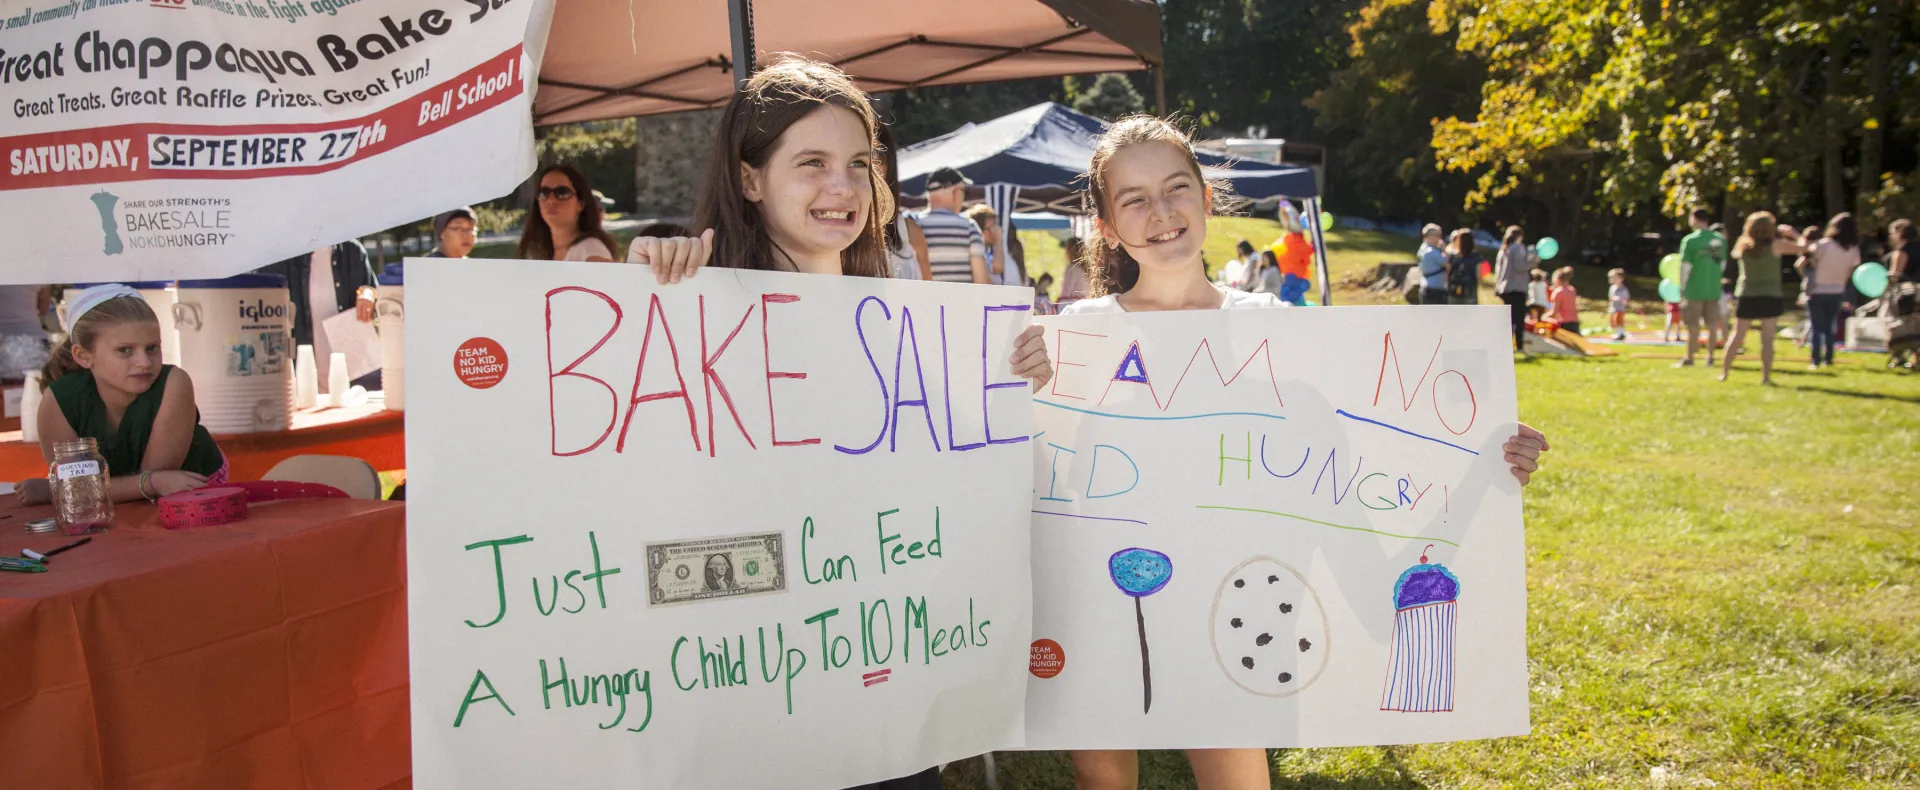 Charity Event Ideas to End Childhood Hunger